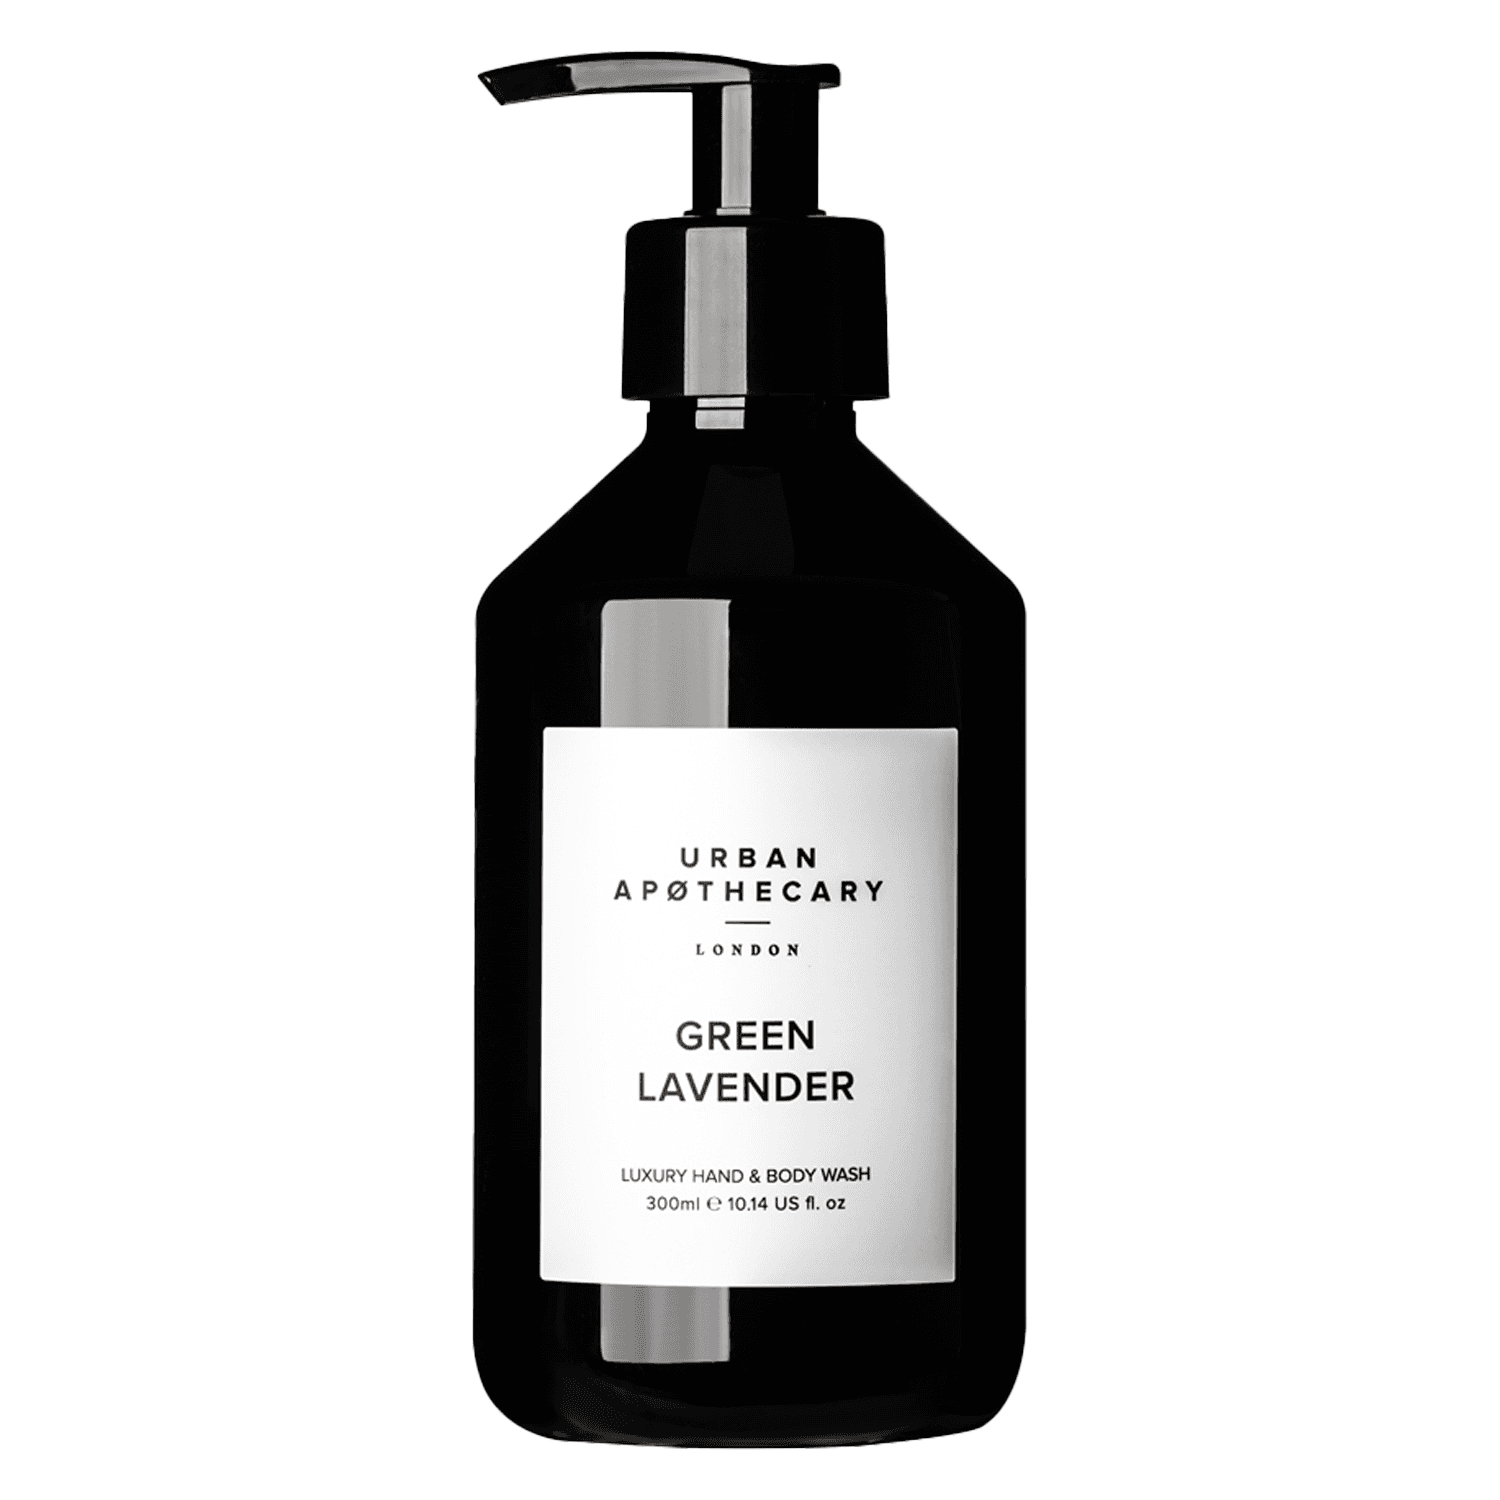 Urban Apothecary - Luxury Hand & Body Wash Green Lavender